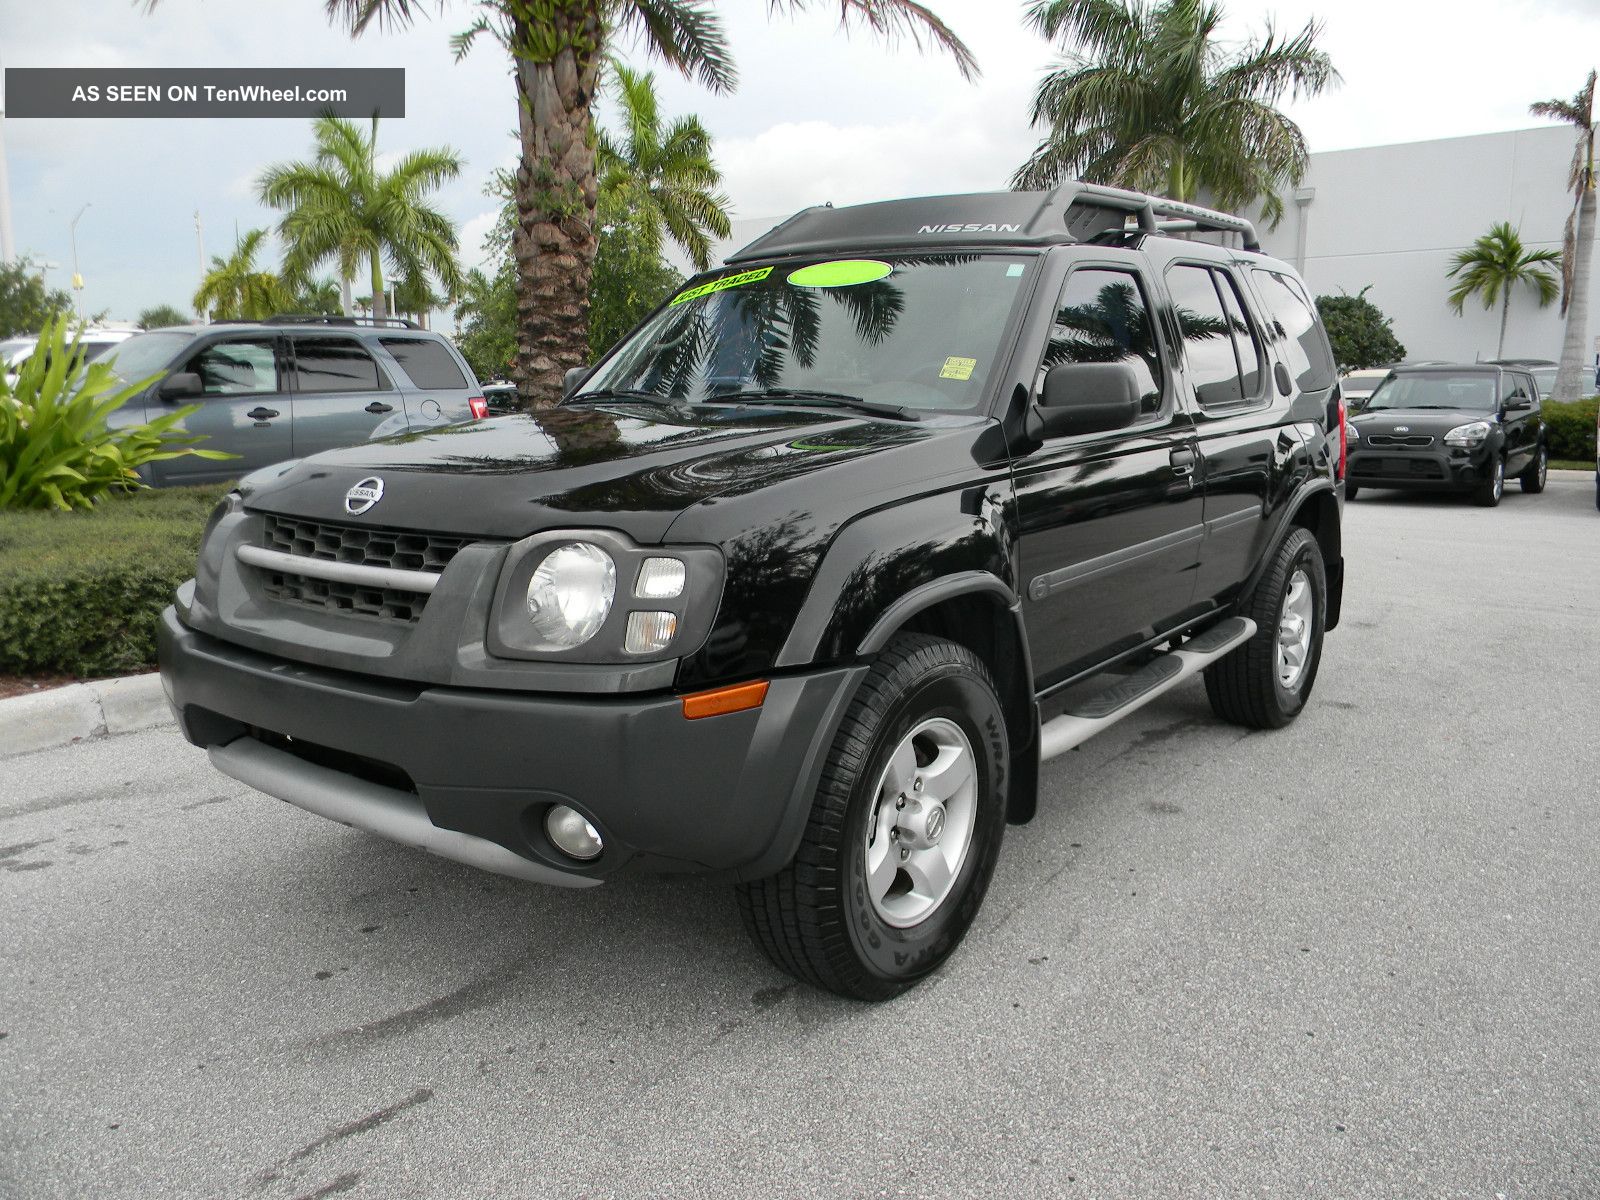 Looking for 2004 more nissan xterra sport utility vehicles #7